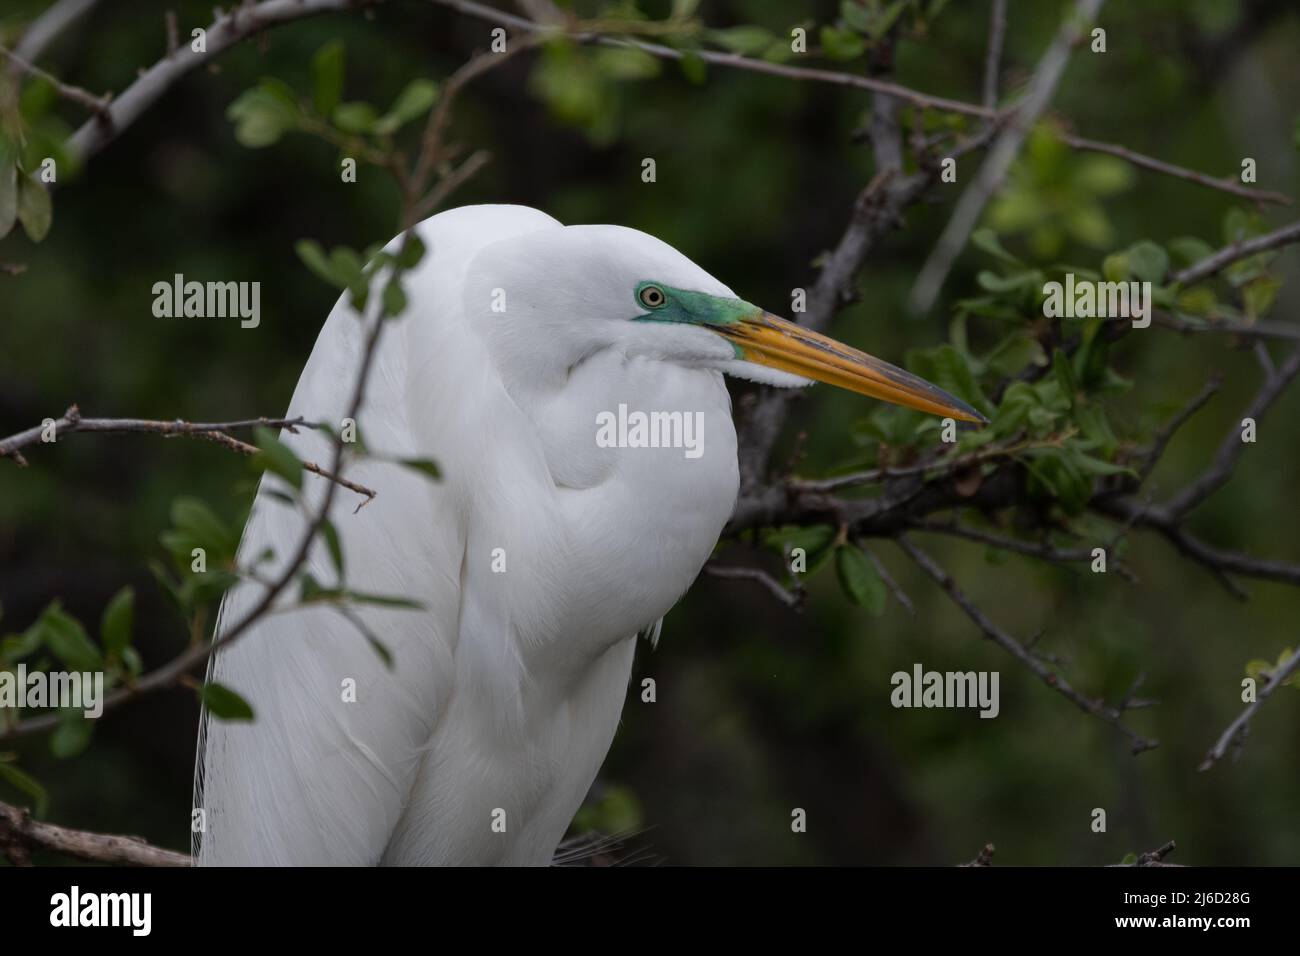 A Great White Egret surround by branches and leaves as it sits on a branch in the woods at the UTSWMC Rookery in Dallas, Texas on a spring morning. Stock Photo